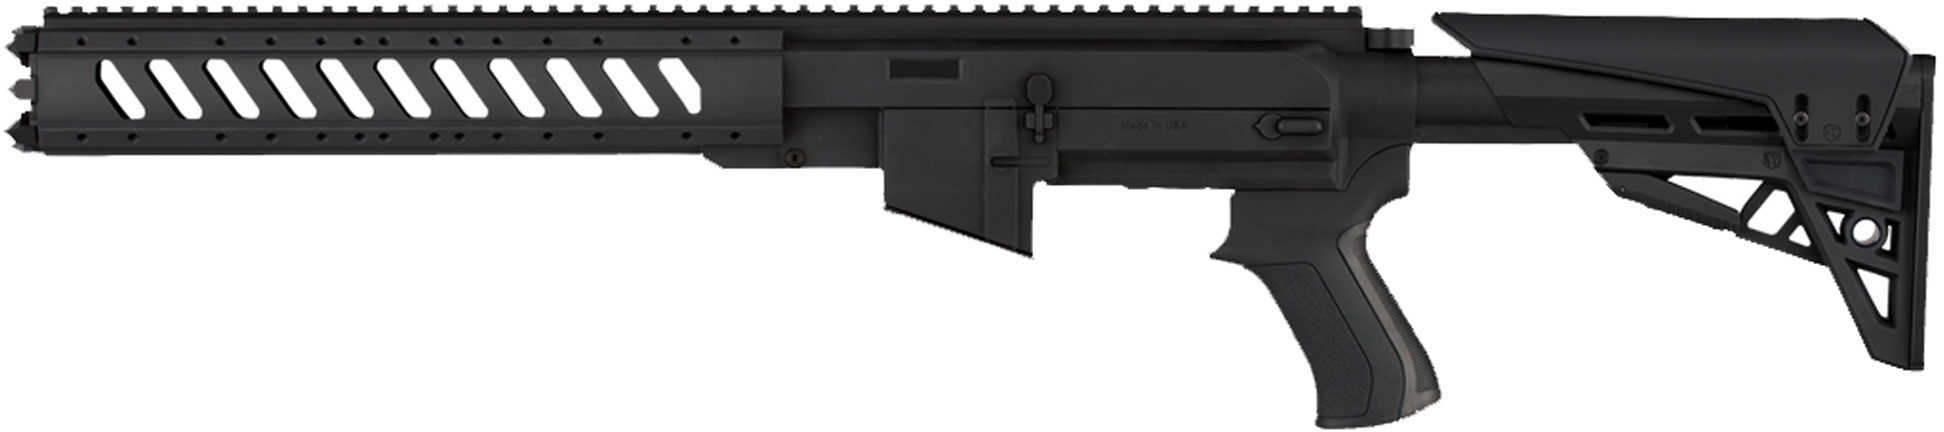 Advanced Technology TactLite Stock System Fits Ruger® 10/22® AR-15 Replicate Polymer Receiver Aluminum 6-sided forend an